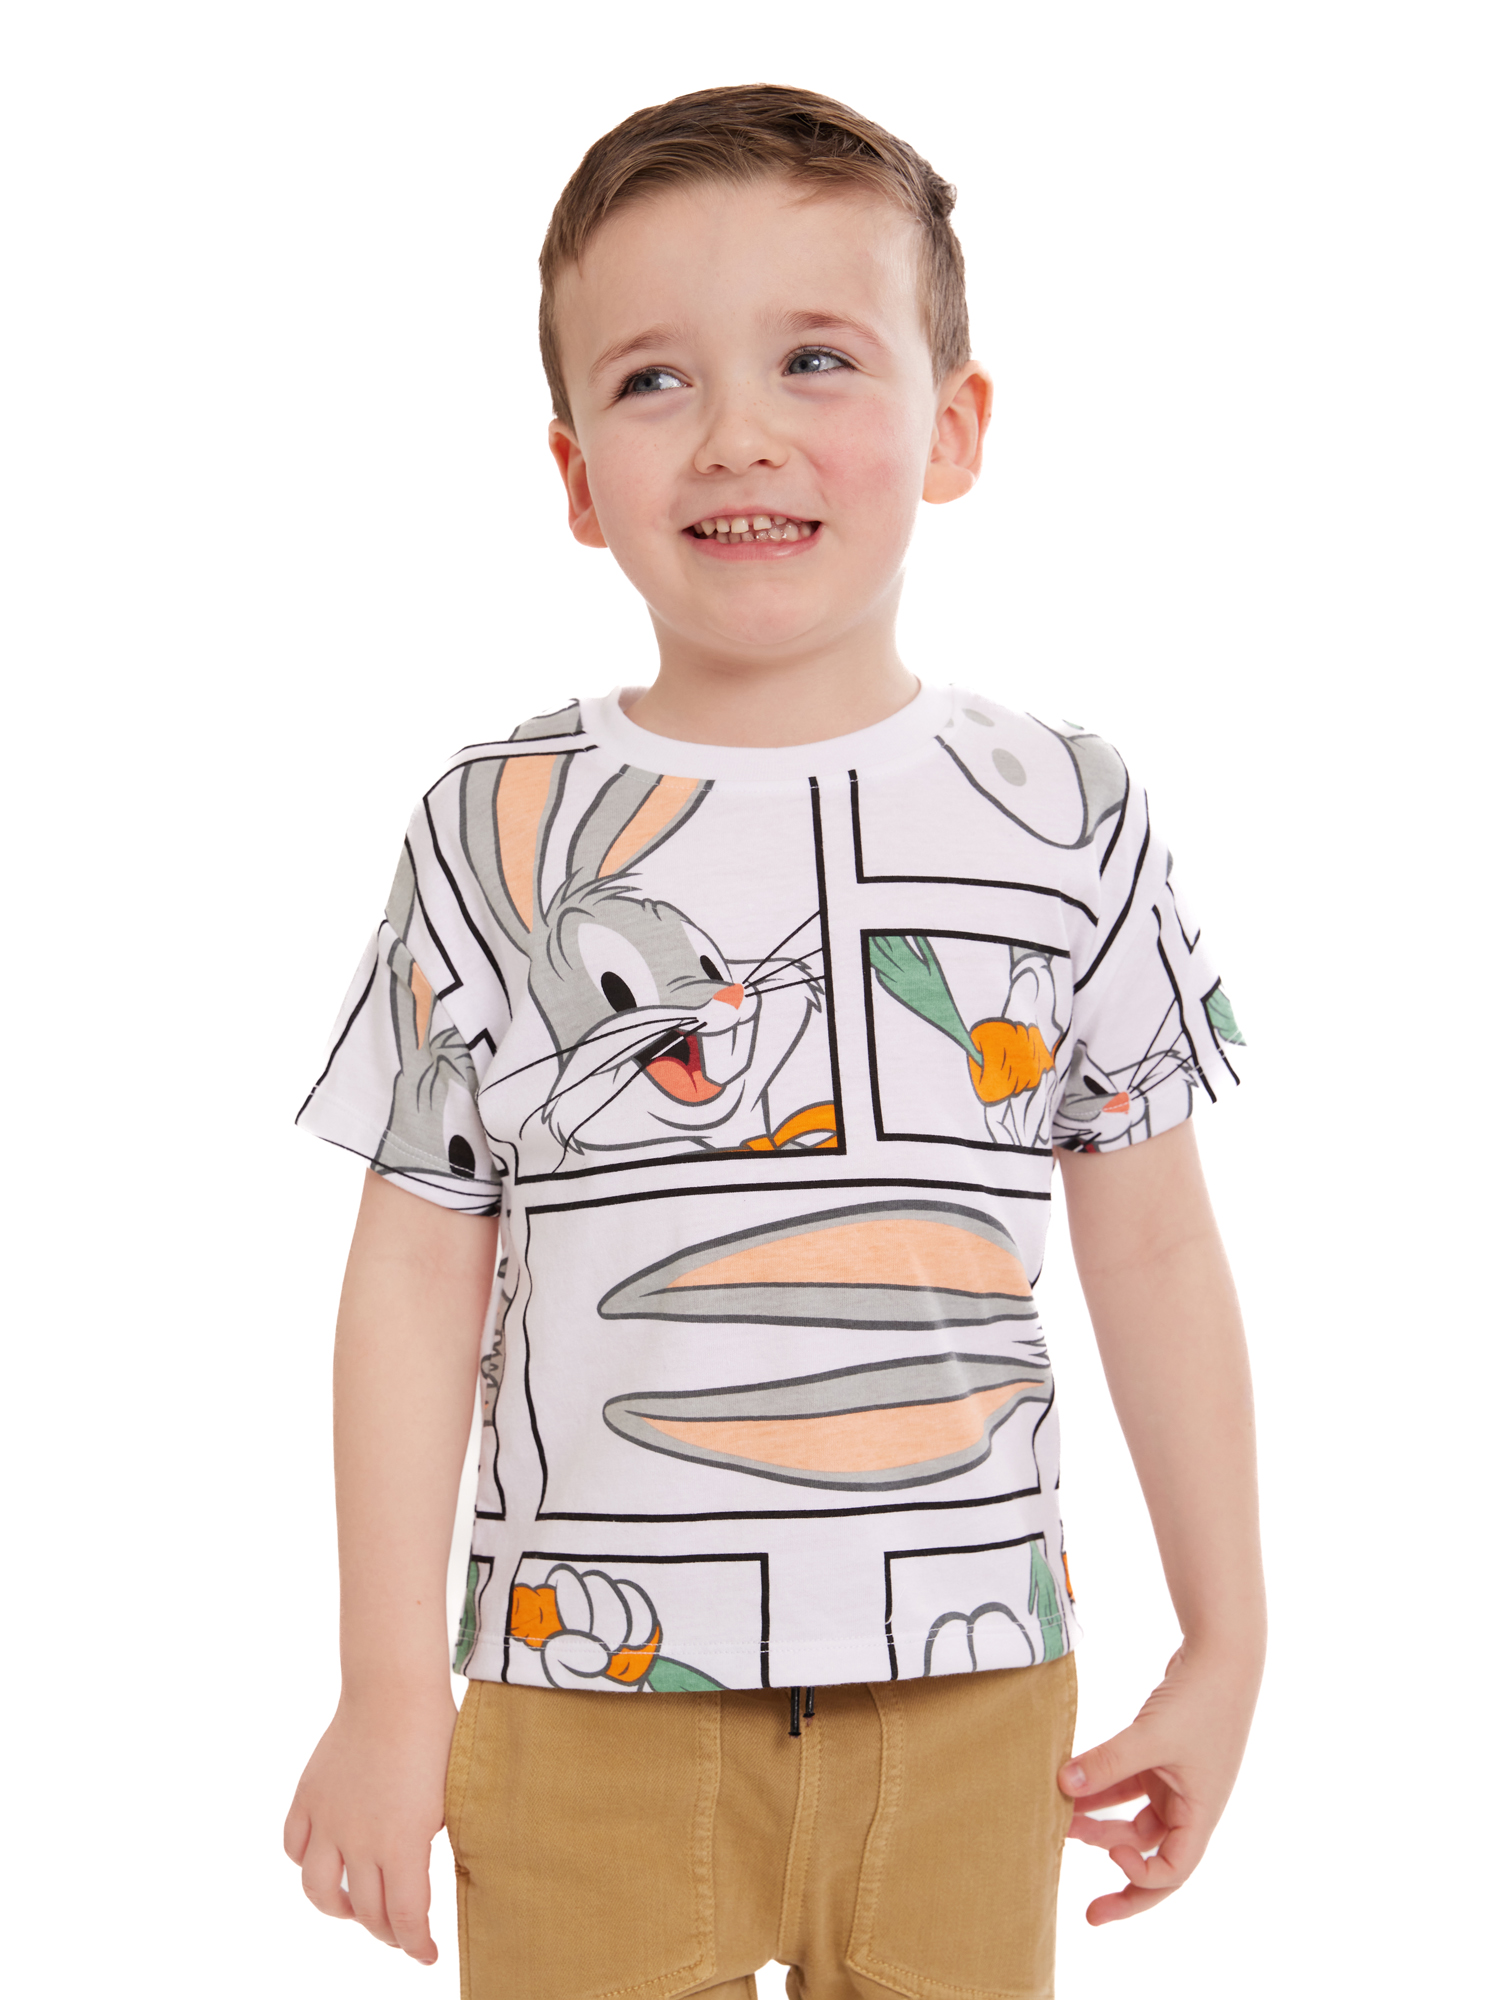 Looney Tunes Toddler Boy Graphic Tees, 2-Pack, Sizes 2T-5T - image 3 of 8